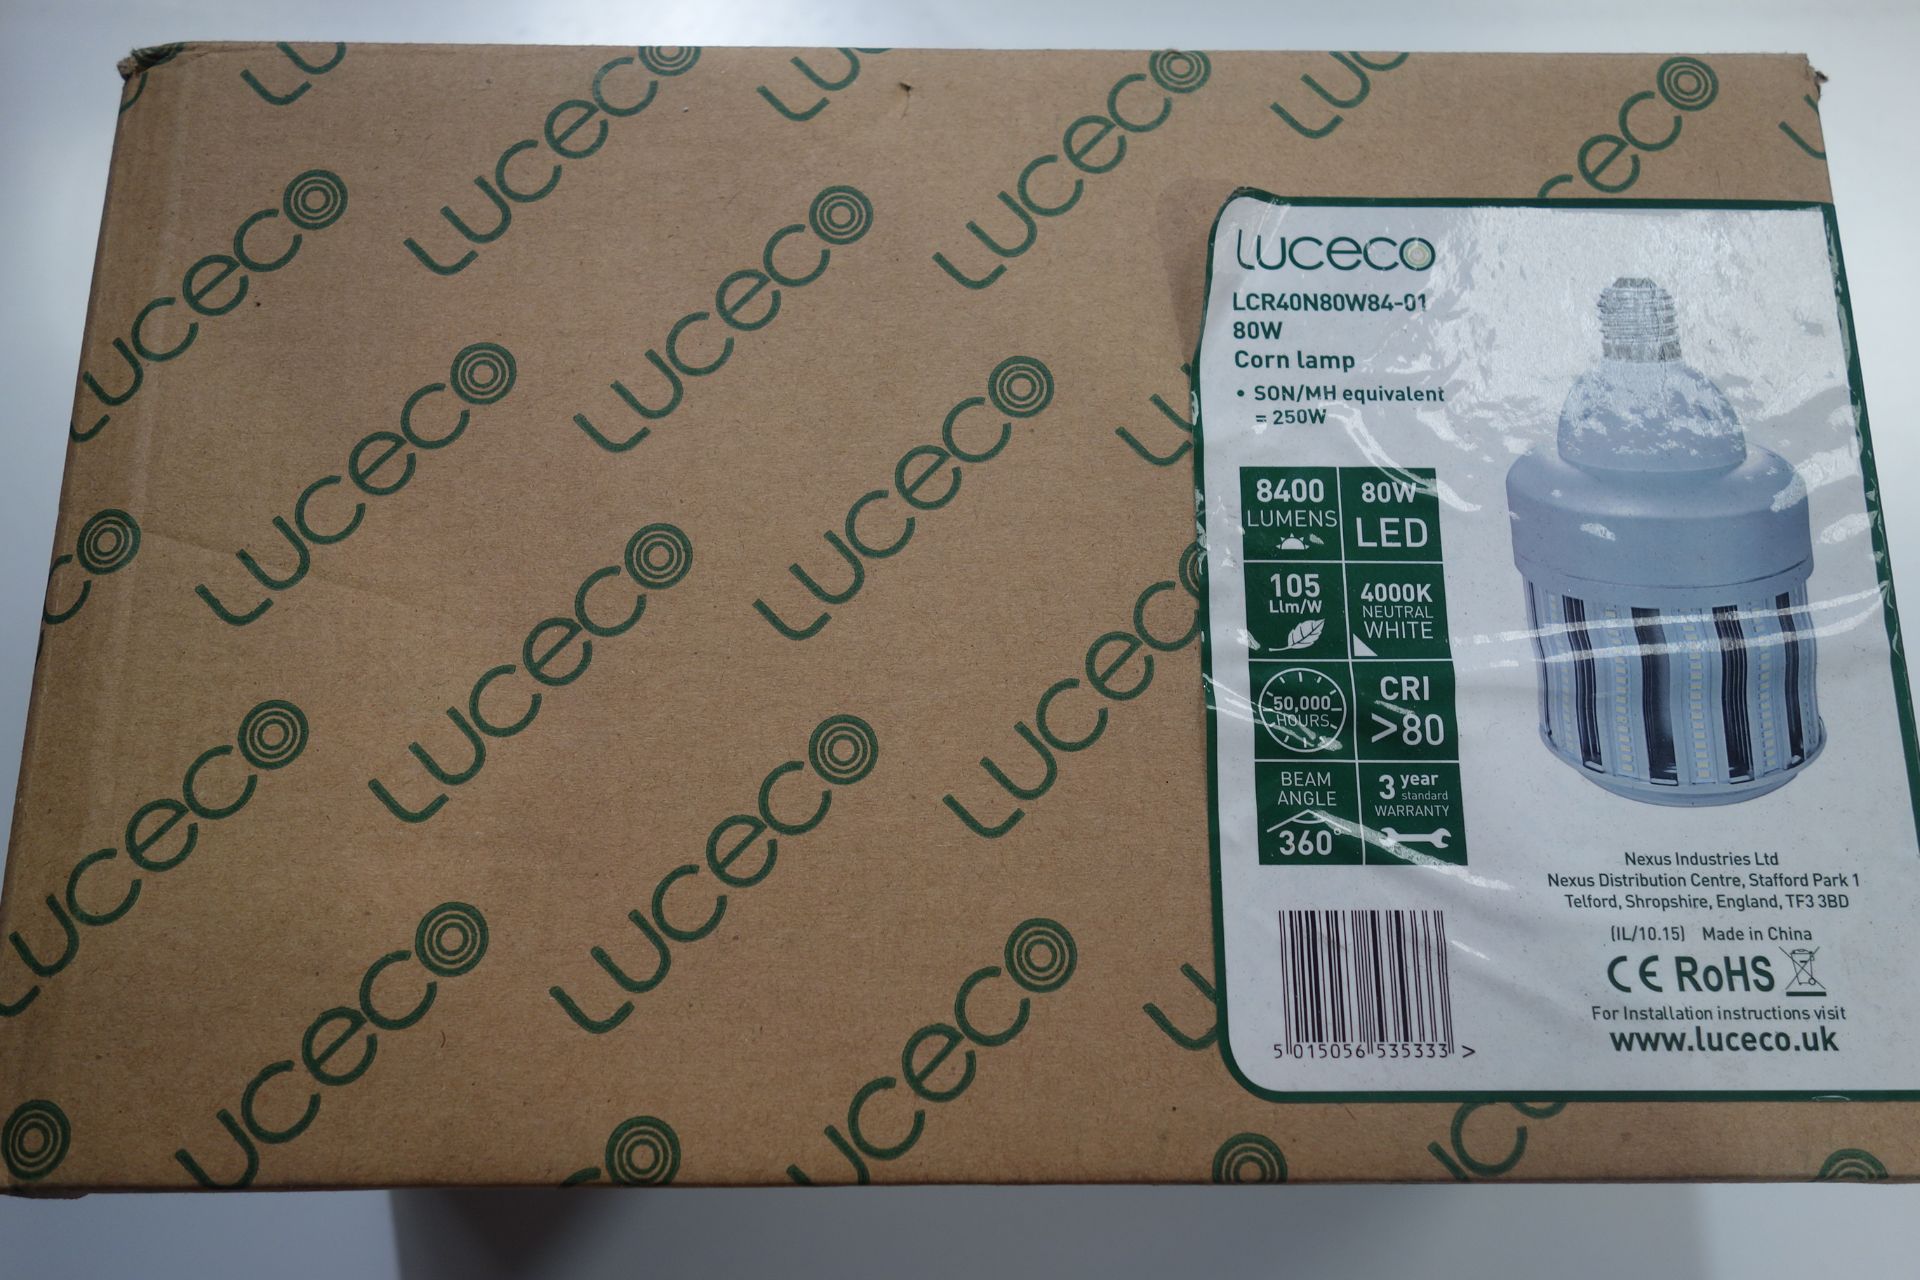 10 X Luceco LCR40N80W84-01 Corn Lamp 80W LED 8400 Lumens 4000K Neutral White Equivalent To Son/MH